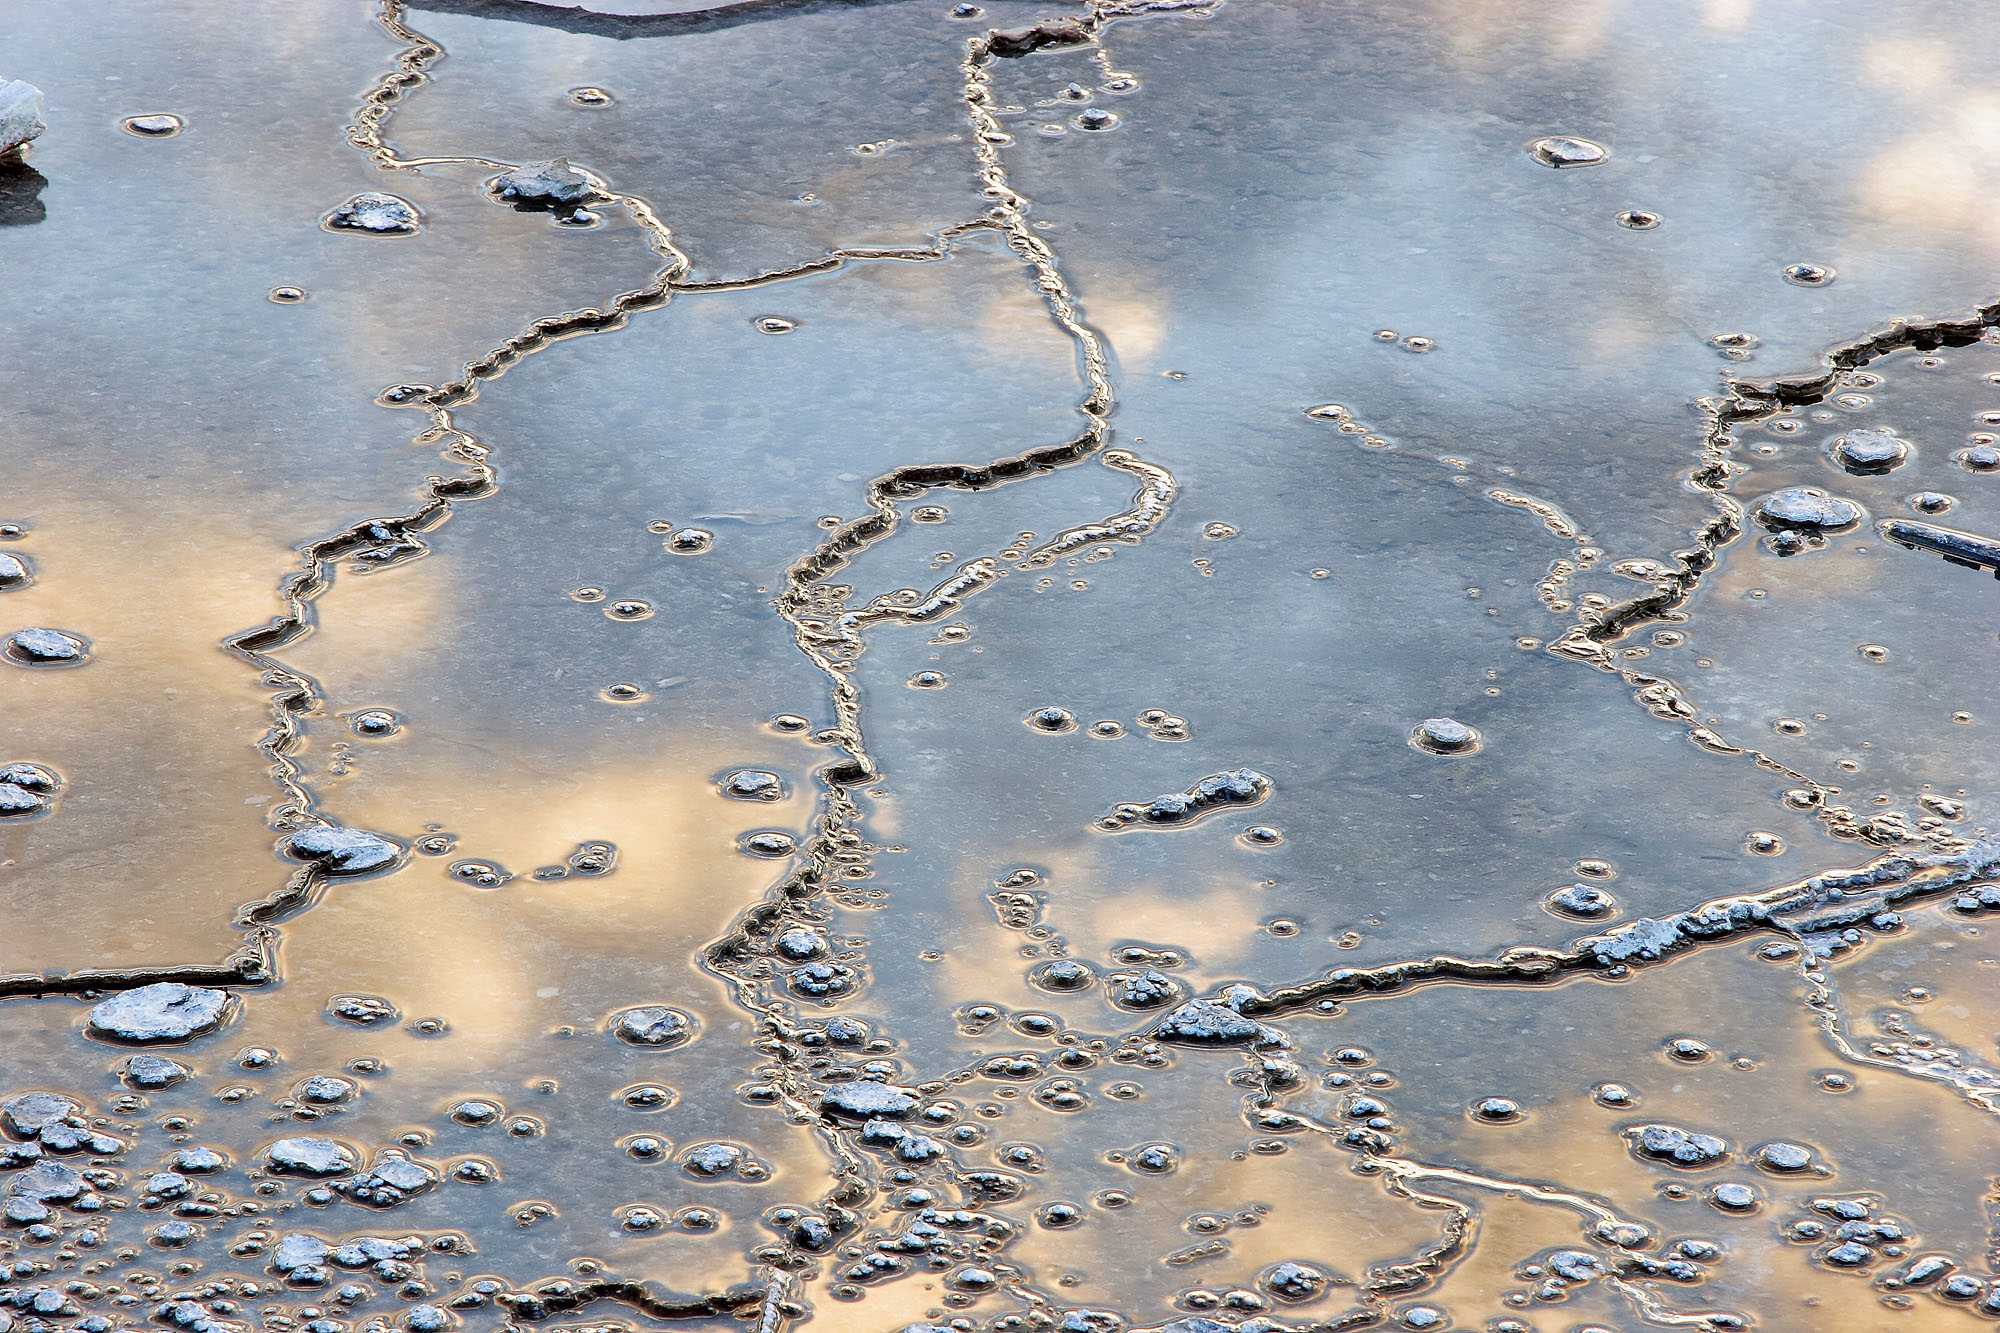 A sinter terrace detail with nodules of geyserite in the Norris Geyser Basin of Yellowstone.